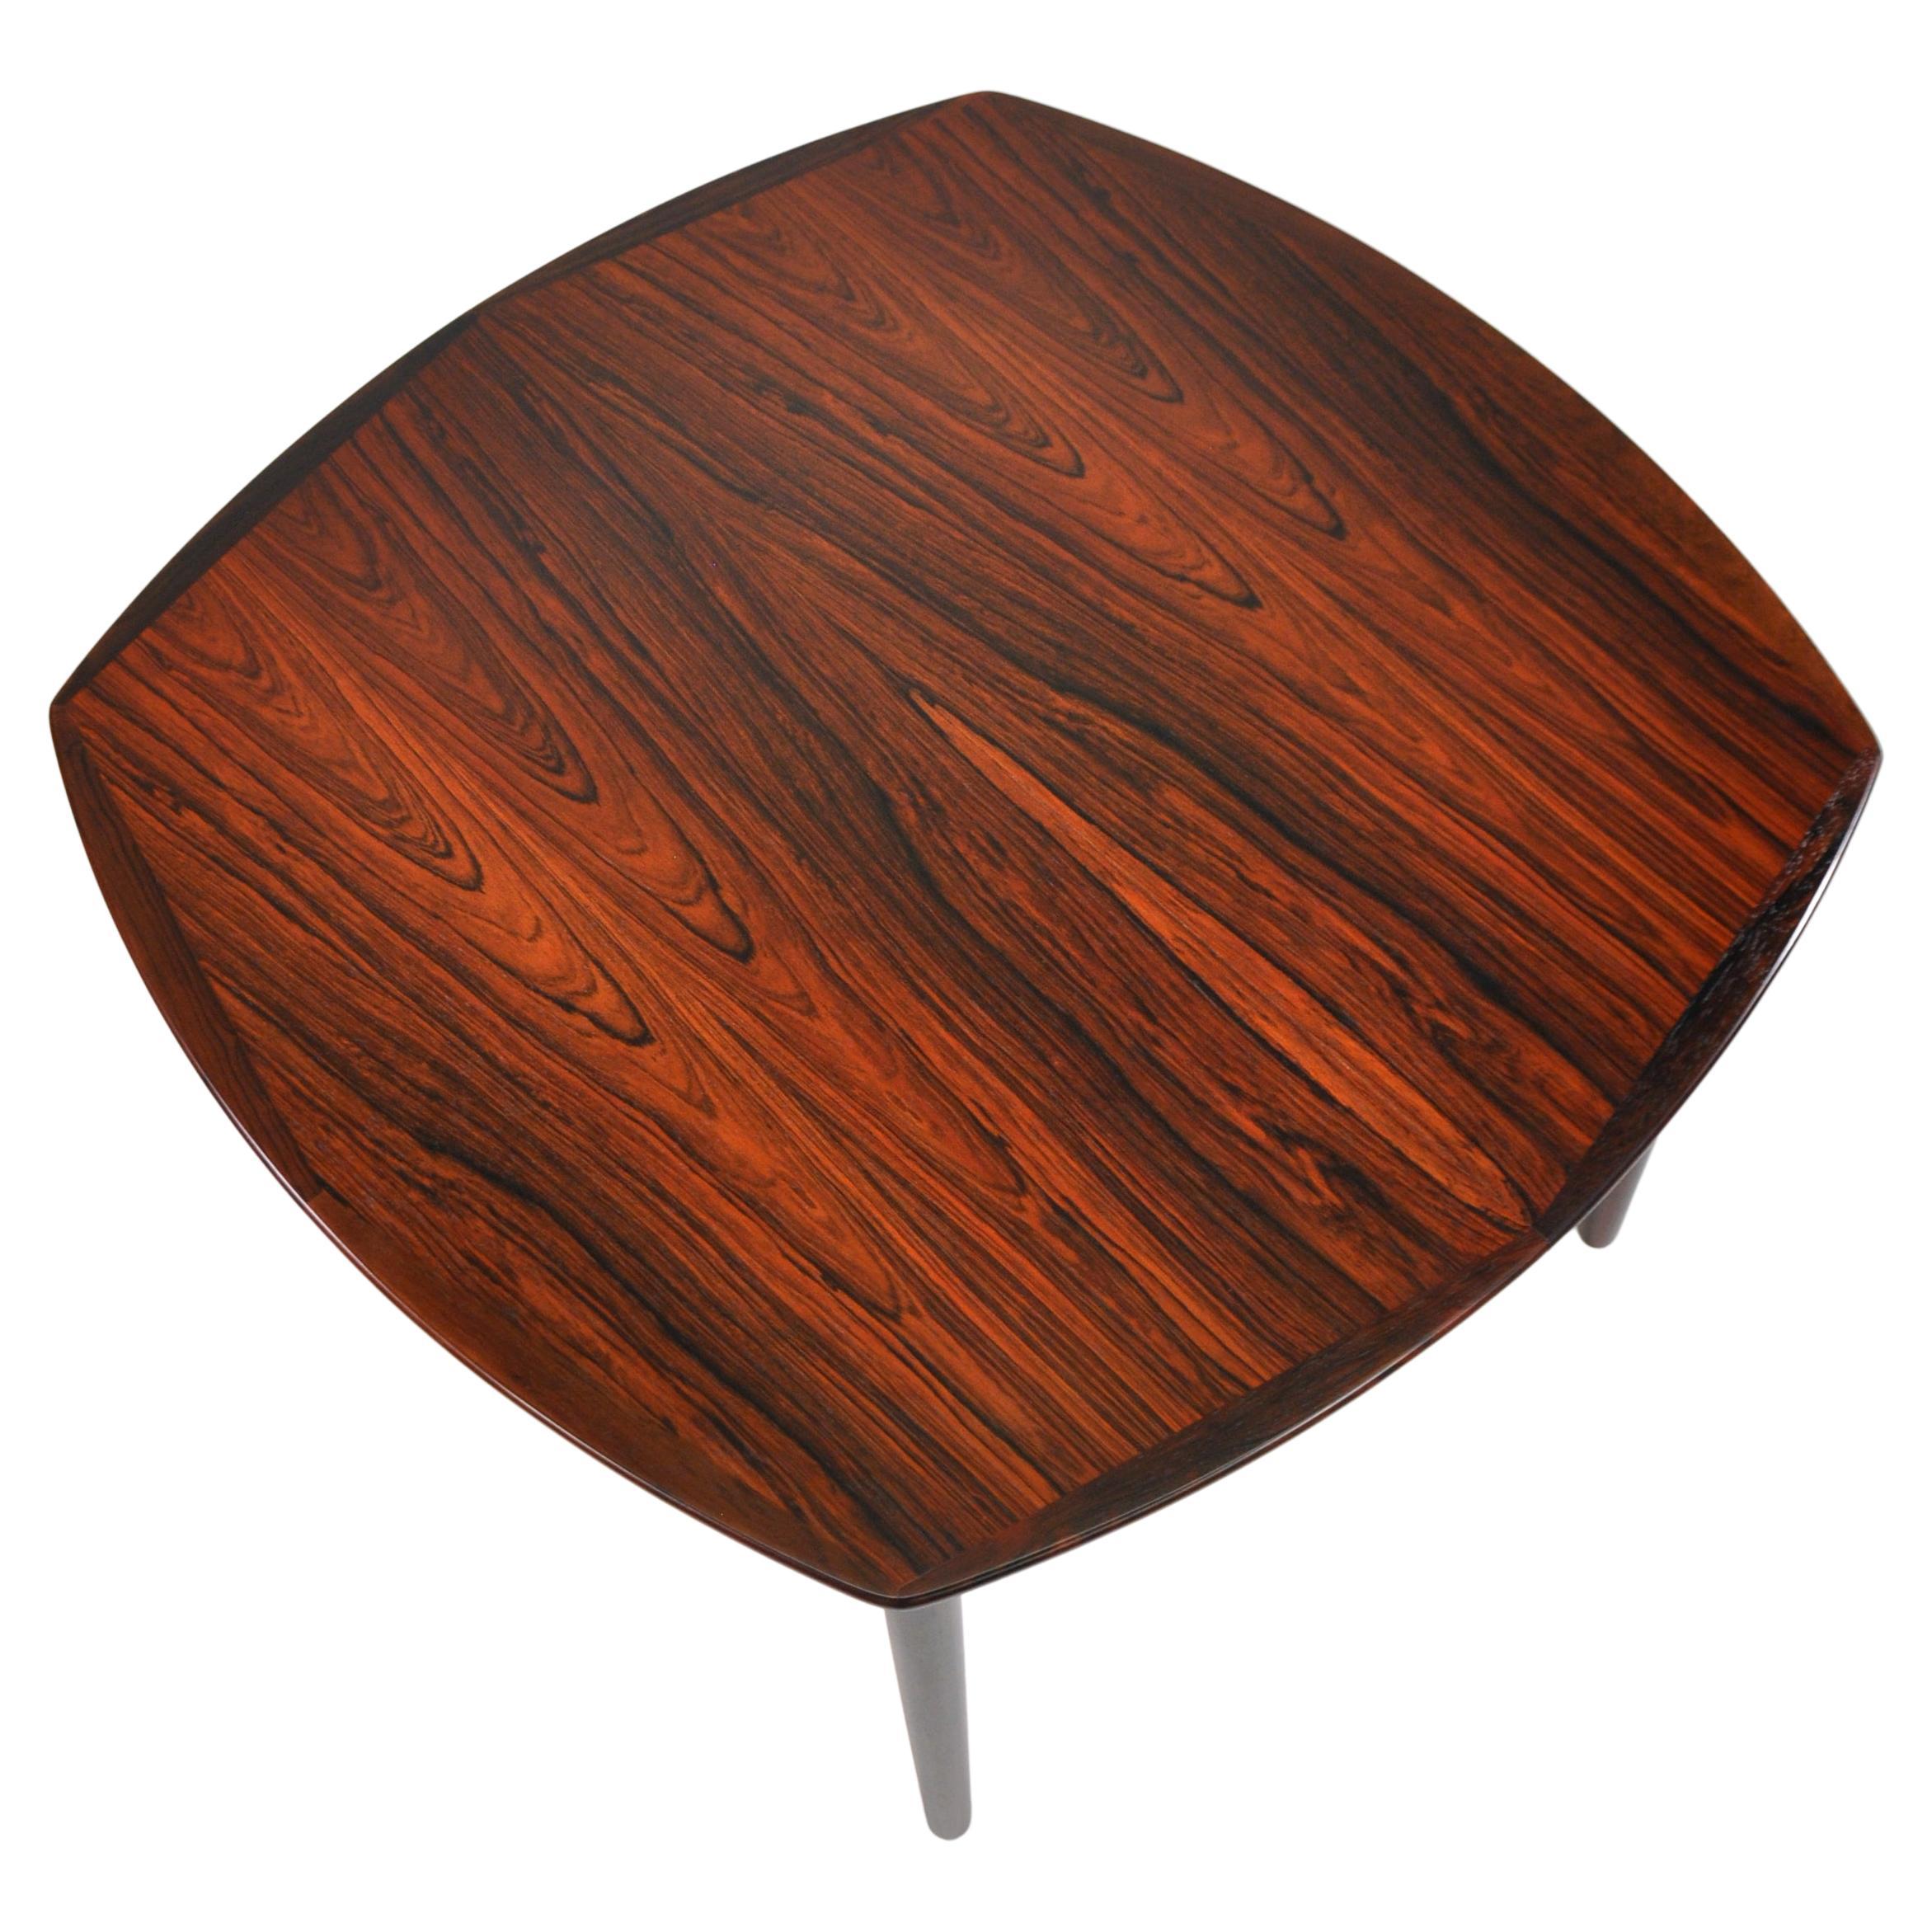 Gorgeous mid-century Scandinavian Modern Brazilian rosewood dining table, by Adolf Relling and Rolf Rastad for Gustav Bahus in the 1960s. The table seats four when compact and extends to accommodate six with one leaf, or a dinner party of eight or